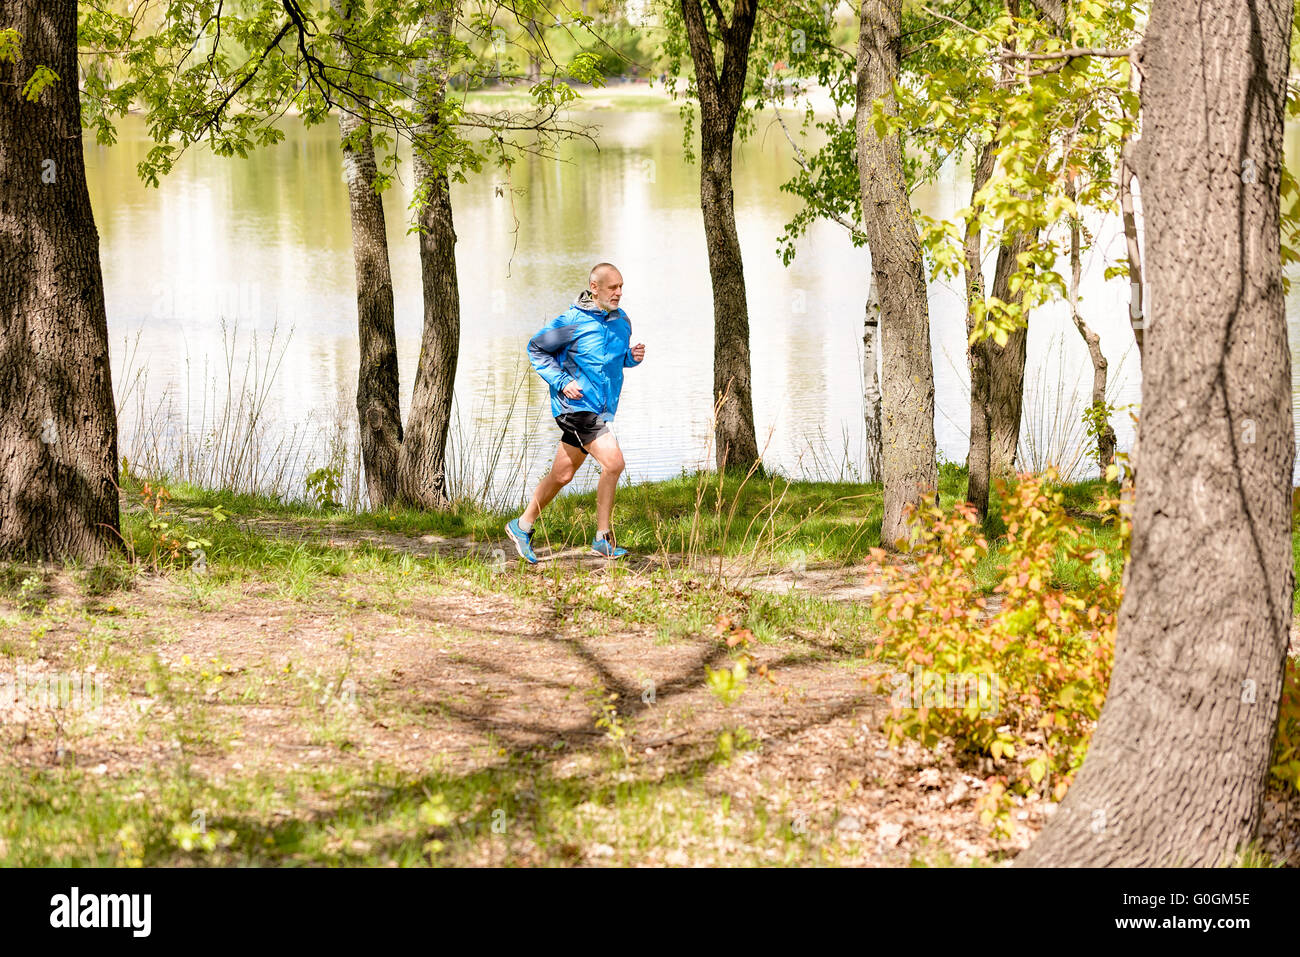 A senior man worn in black and blue is running close to the lake during a warm spring day Stock Photo